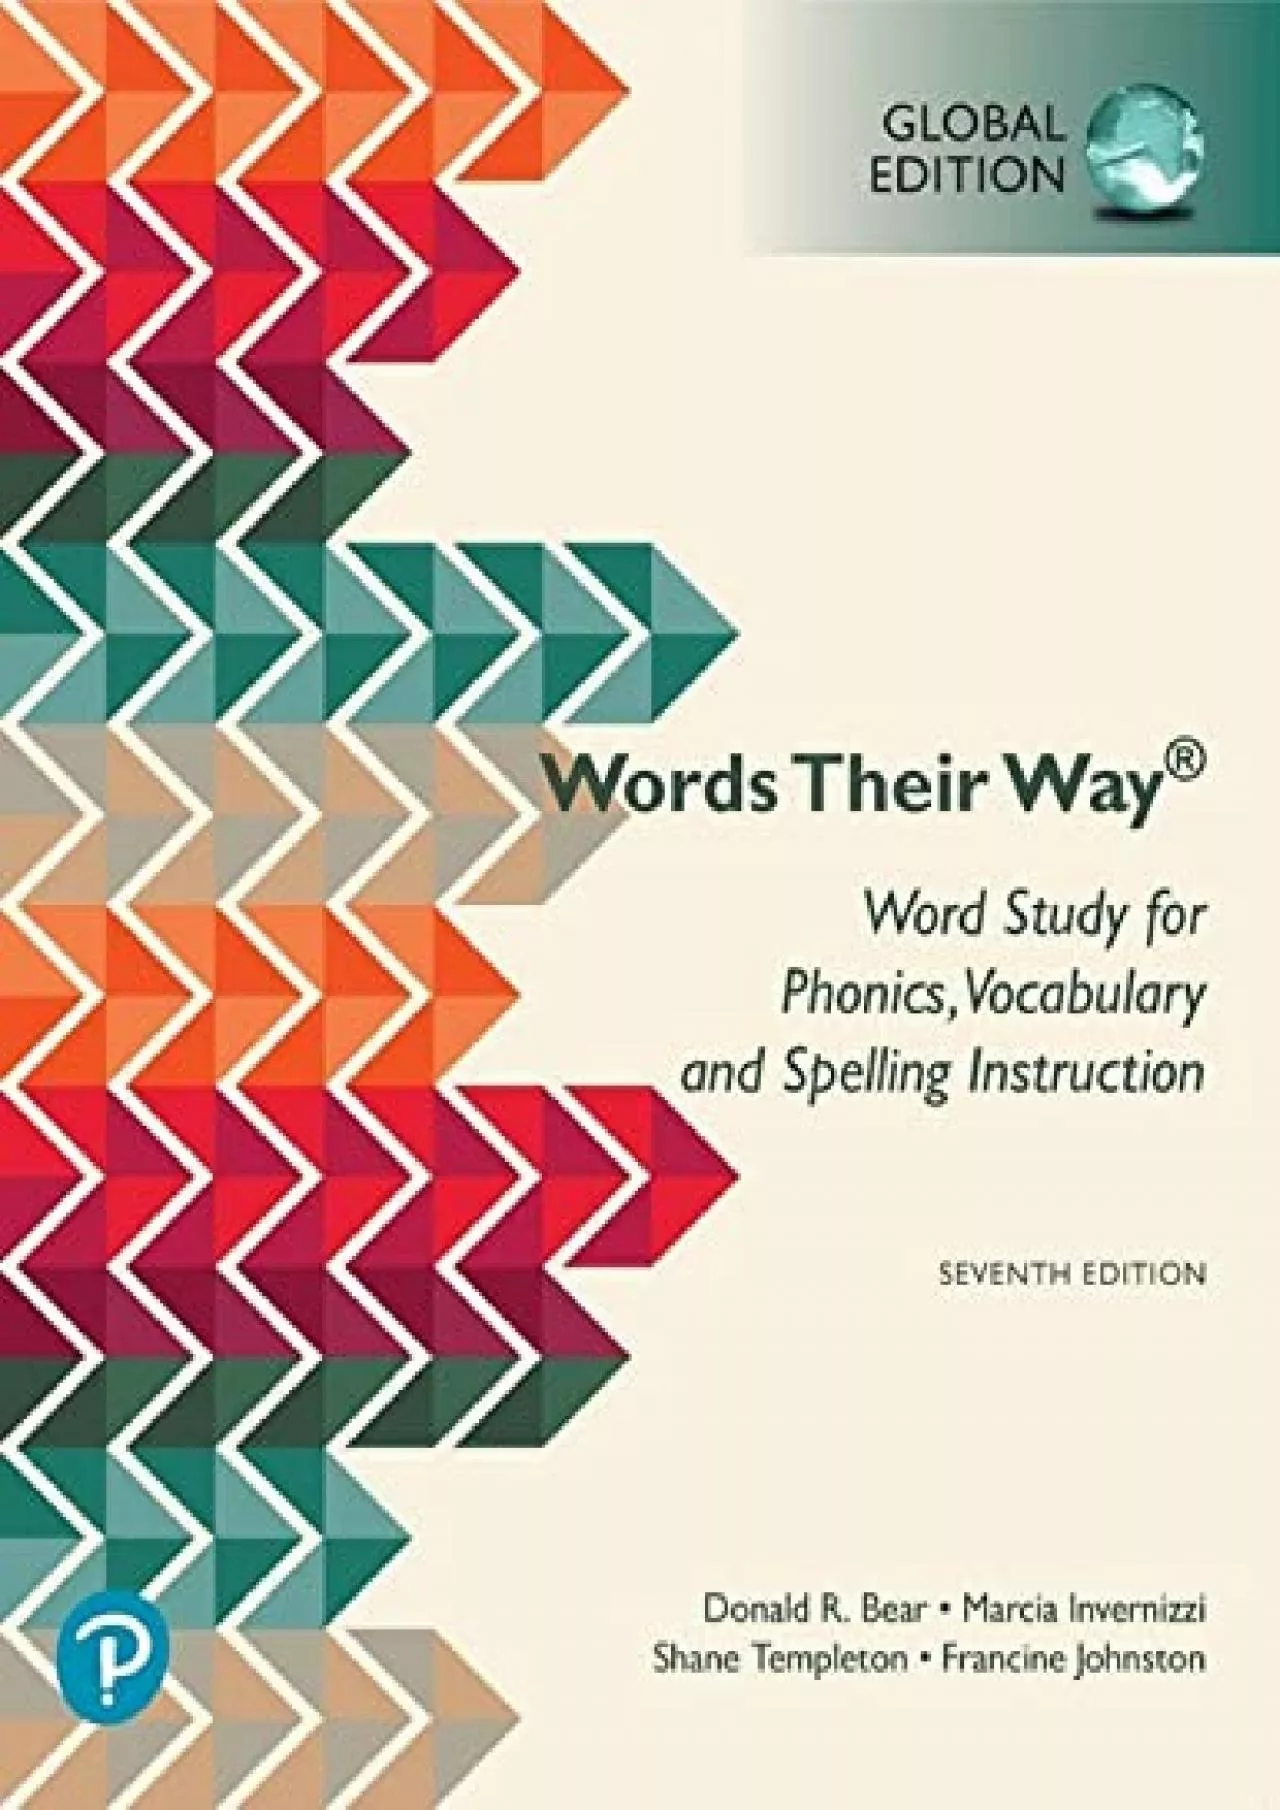 [DOWNLOAD] Words Their Way: Word Study for Phonics, Vocabulary, and Spelling Instruction,